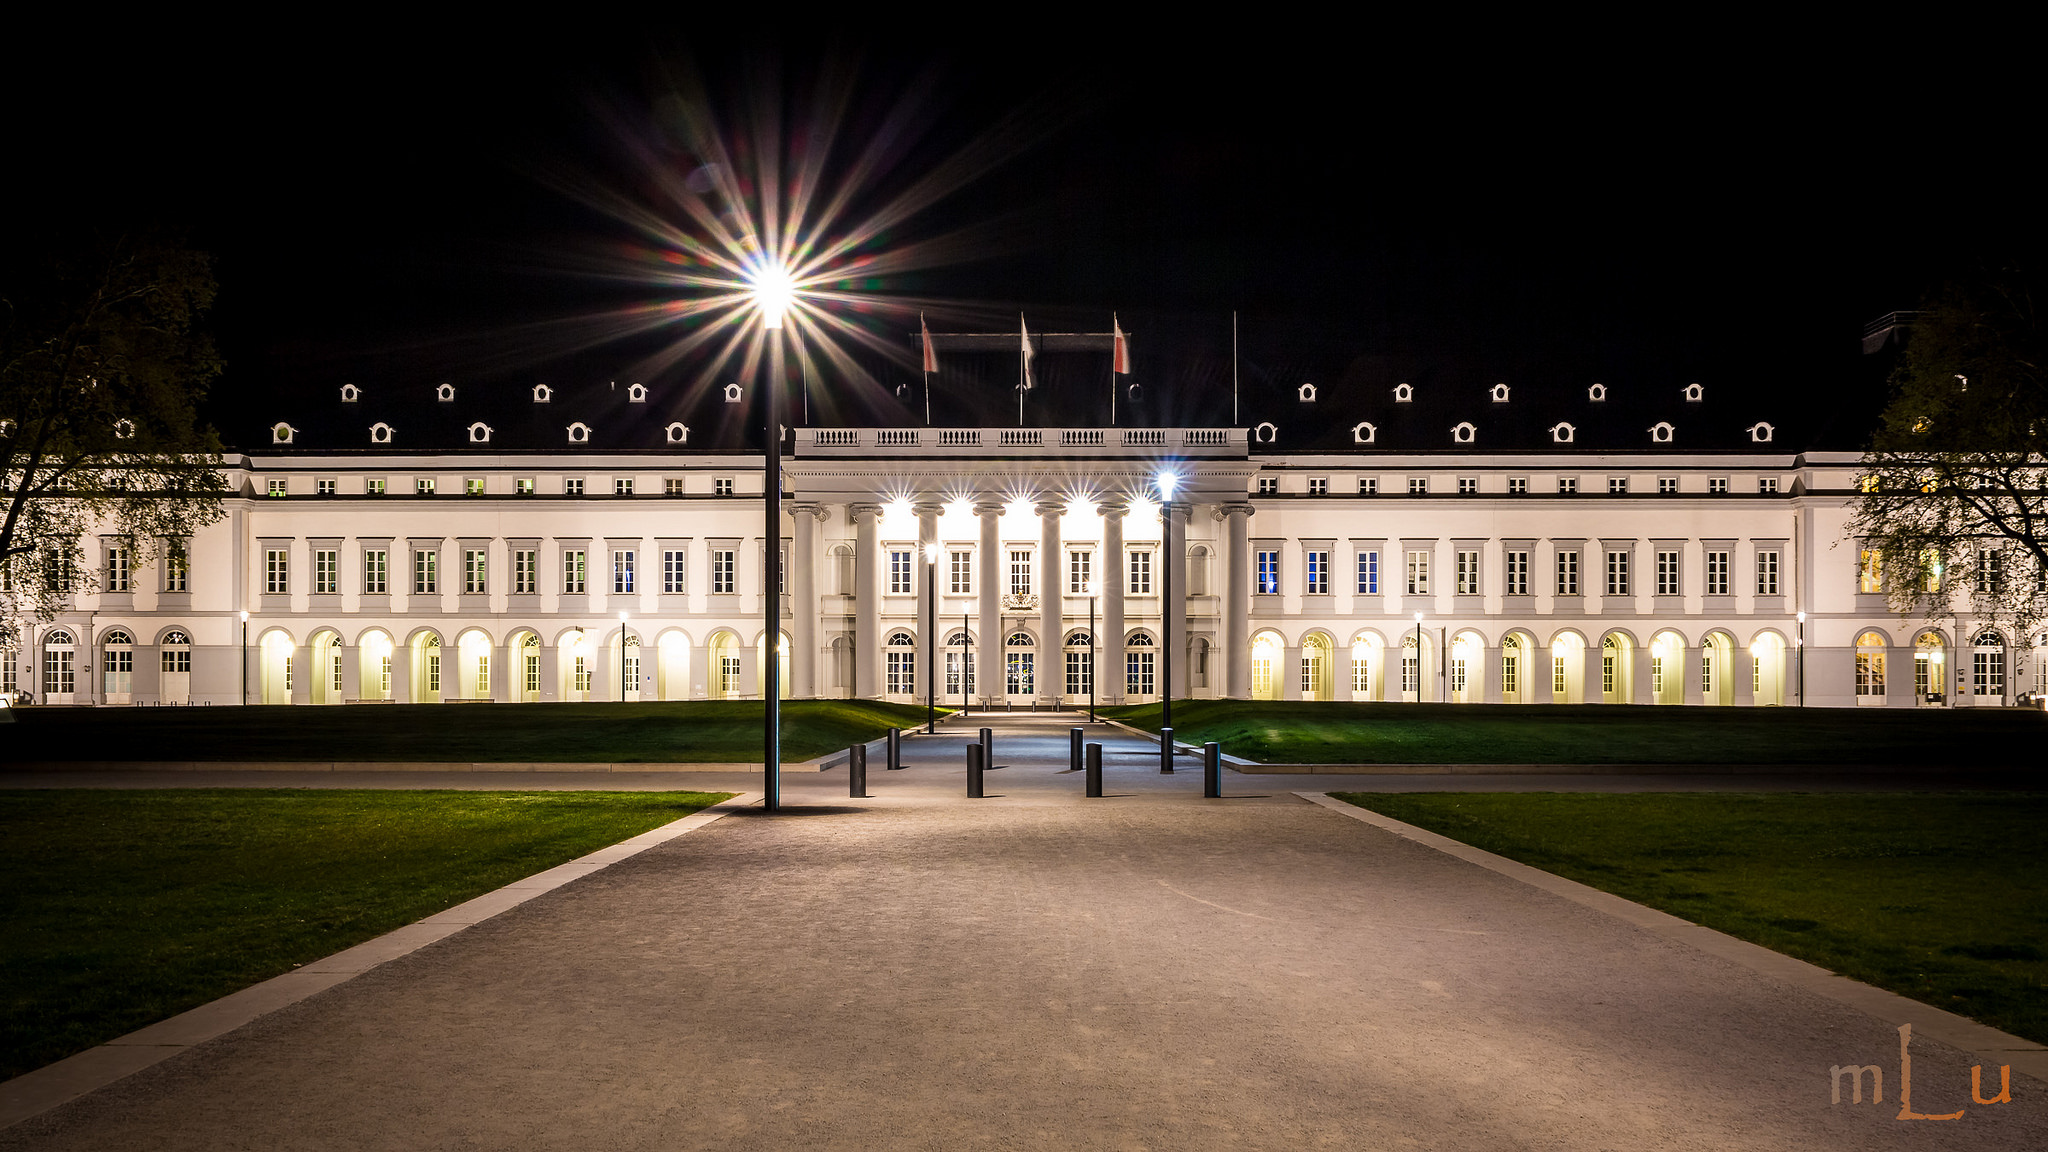 HD Quality Wallpaper | Collection: Man Made, 2048x1152 Electoral Palace, Koblenz